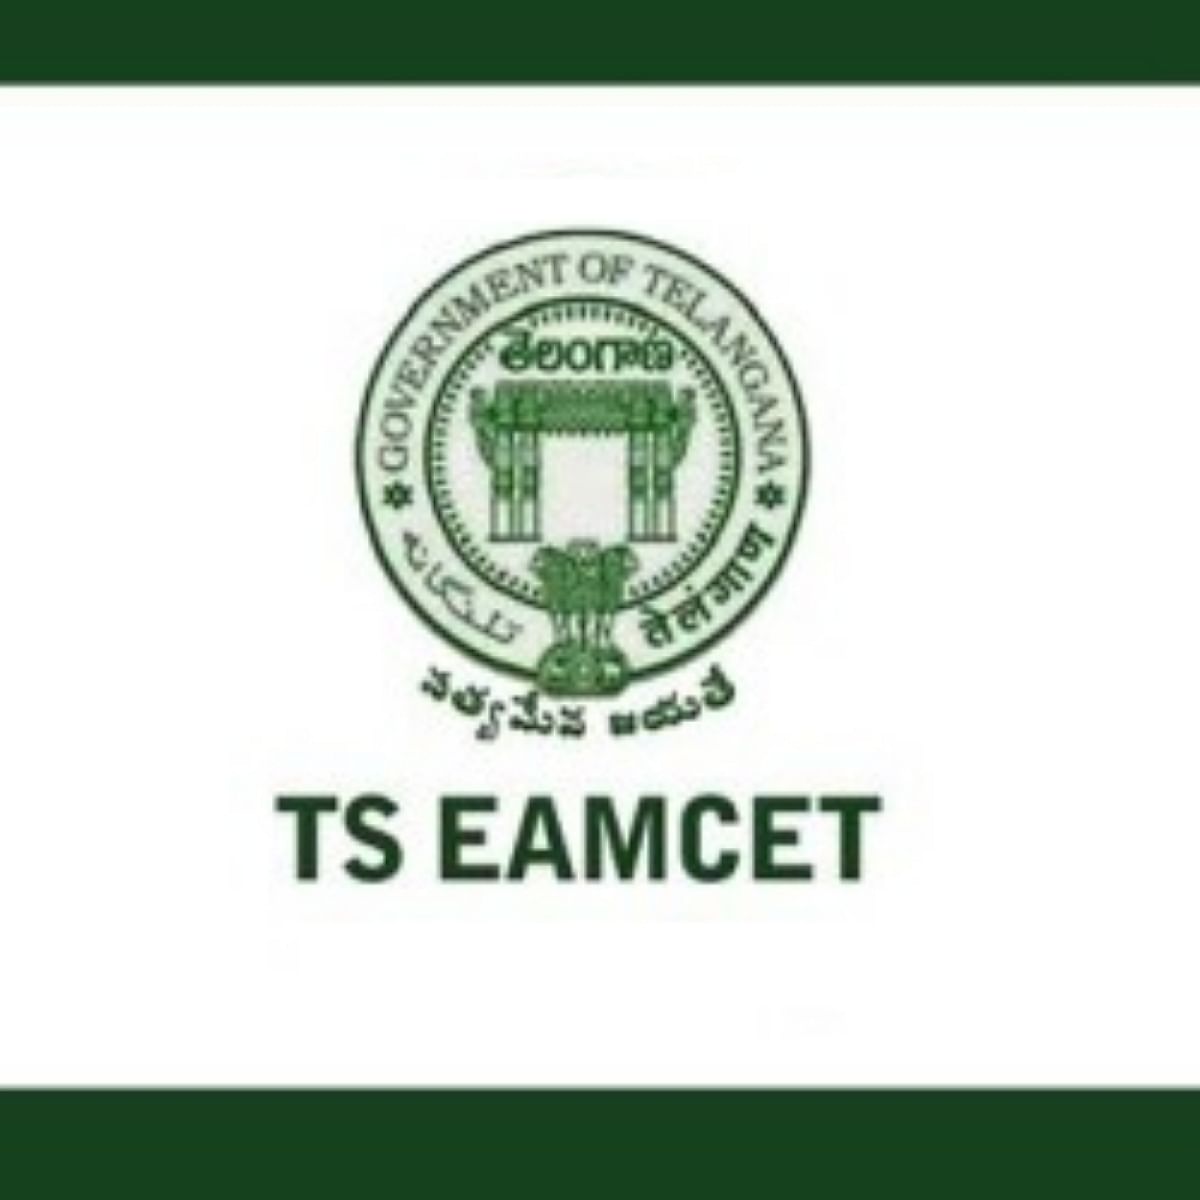 TS EAMCET 2020: Last Day to Apply Extended Again Due to COVID-19